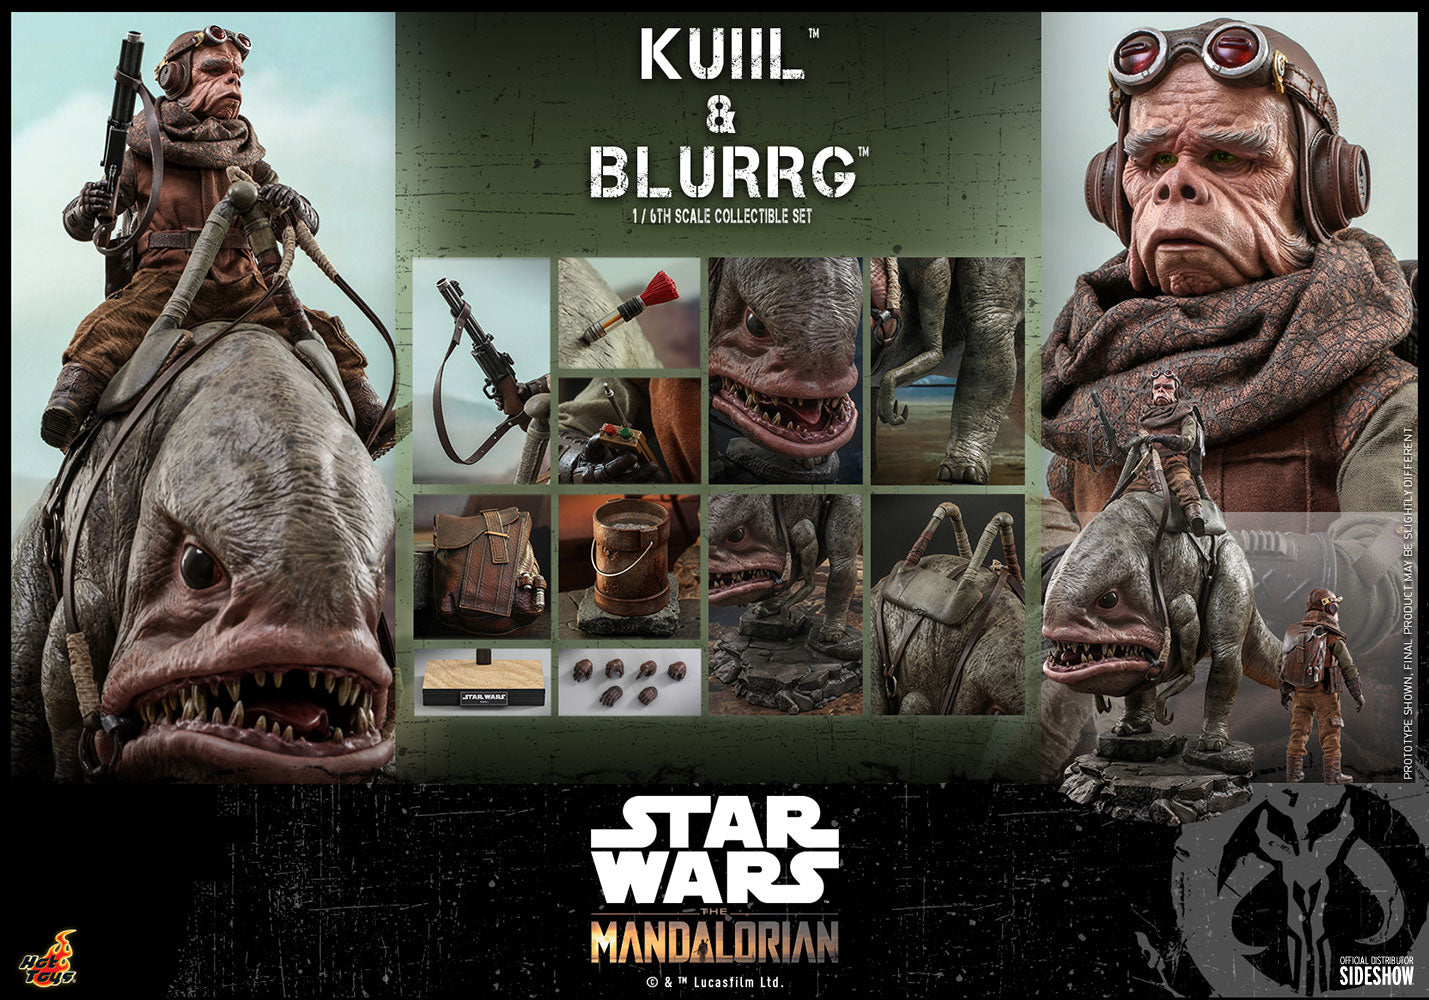 Kuiil And Blurrg 1:6 Scale Collectible Figure